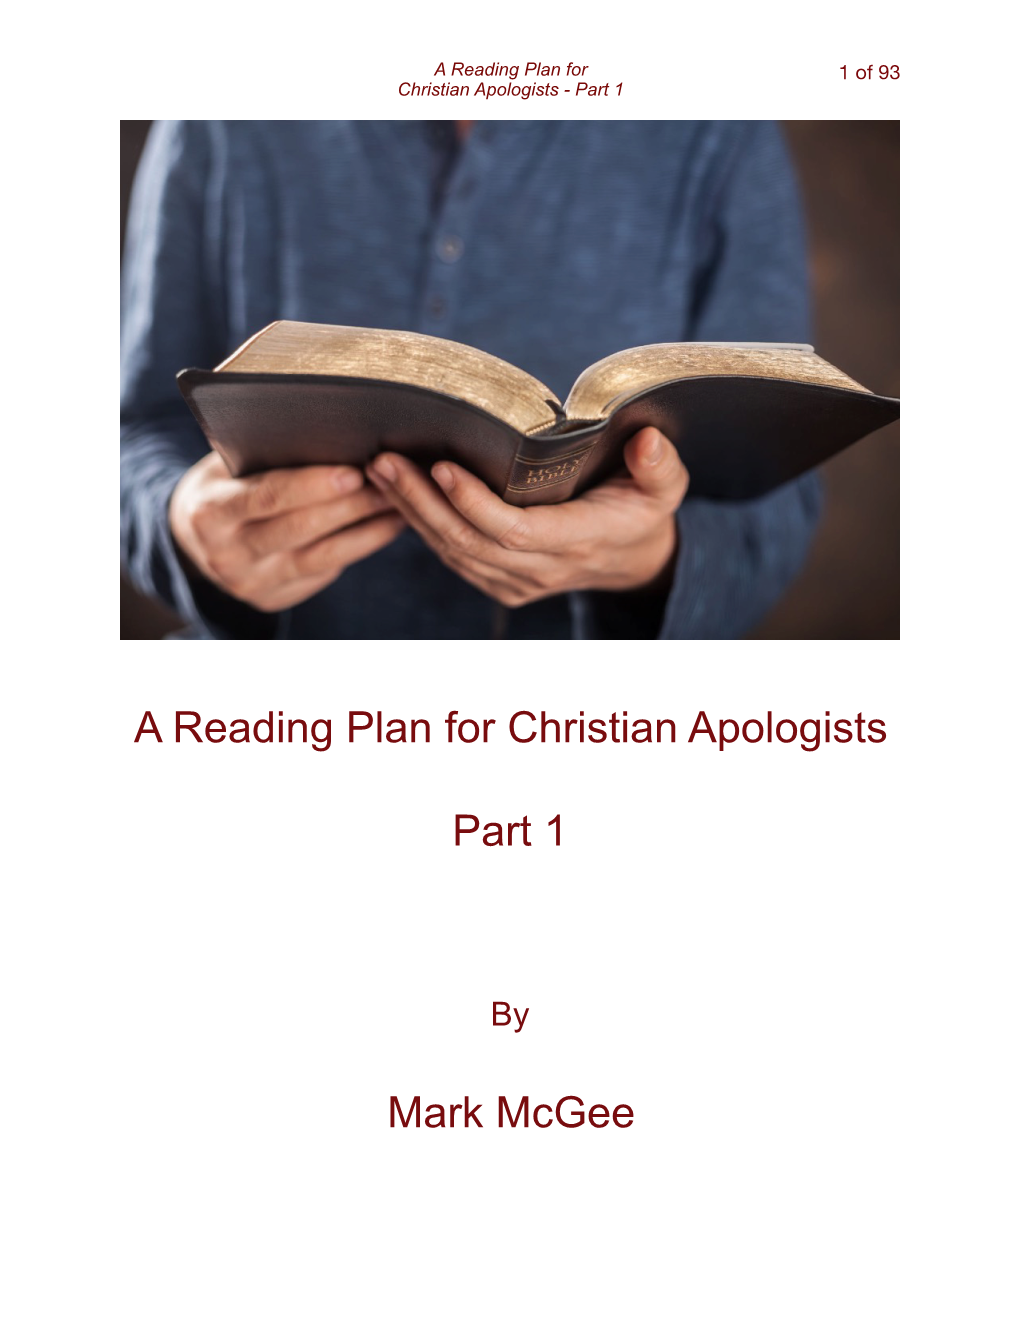 A Reading Plan for Christian Apologists Part 1